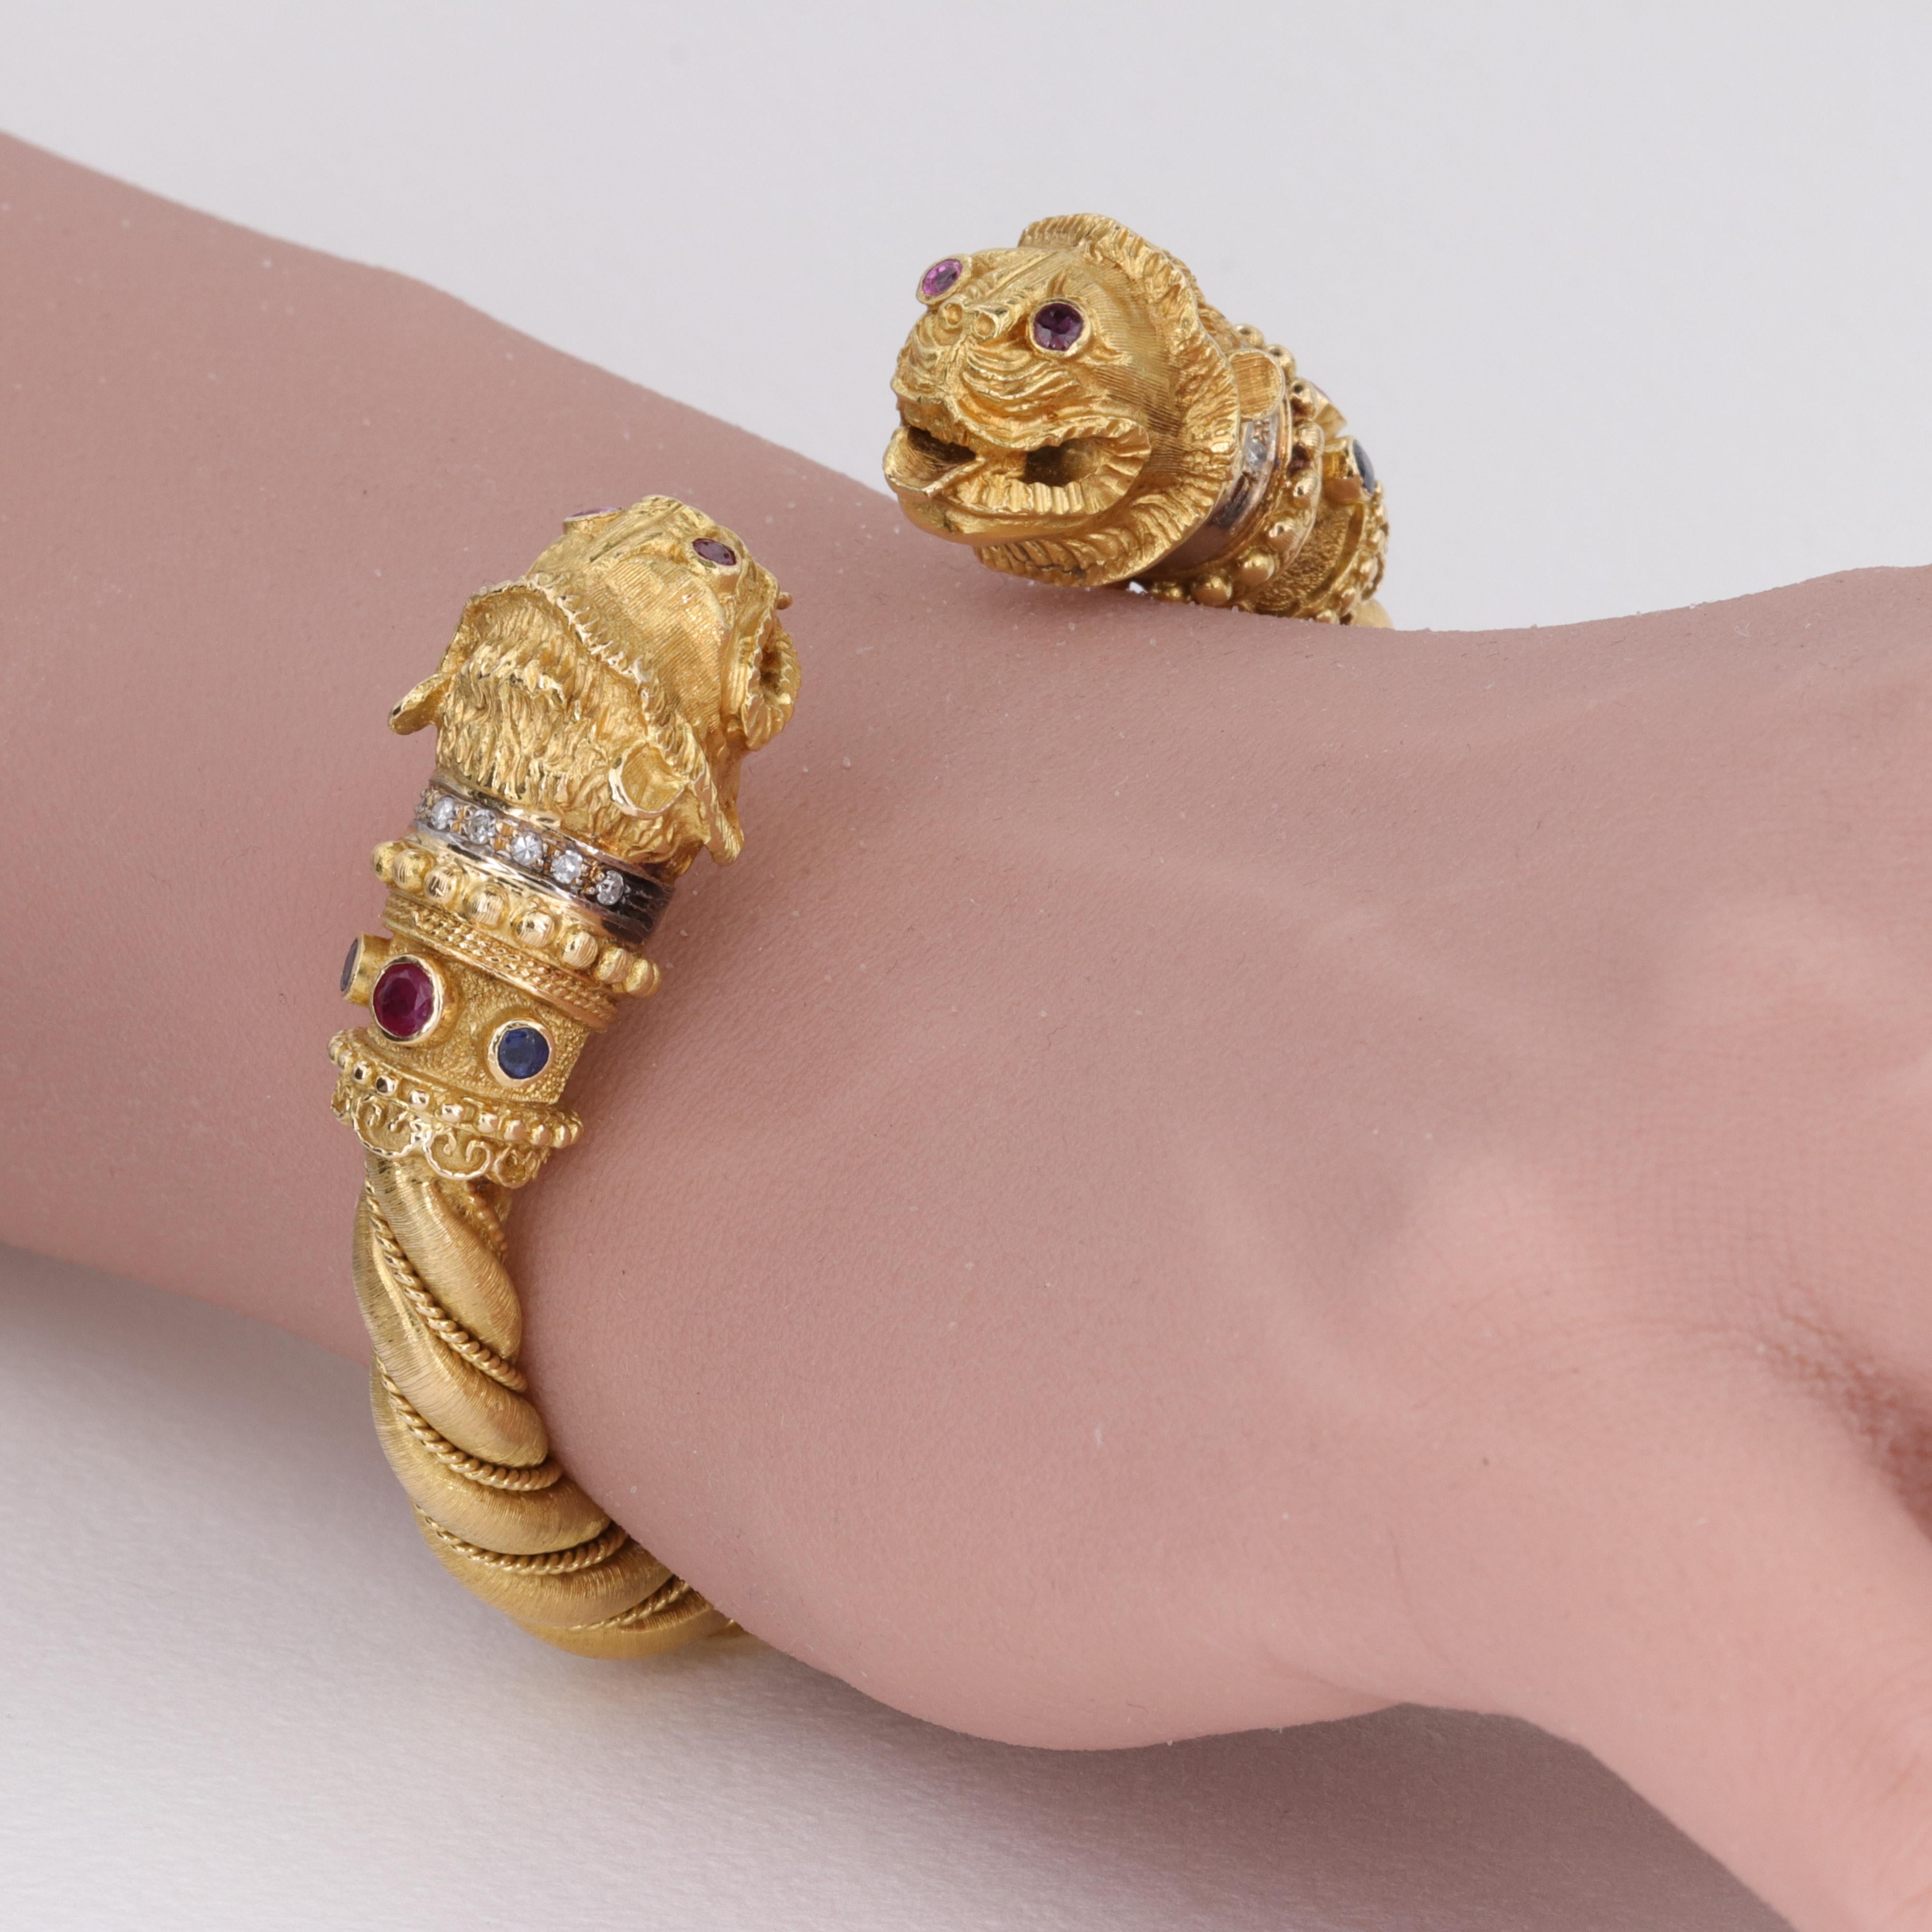 An extremely well made bangle bracelet by iconic Greek jewelry designer Ilias Lalaounis, this bangle depicts 2 Chimera heads atop a textured and twisted 18 karat yellow gold hinged bangle. The chimeras are adorned with vivid red ruby eyes, and